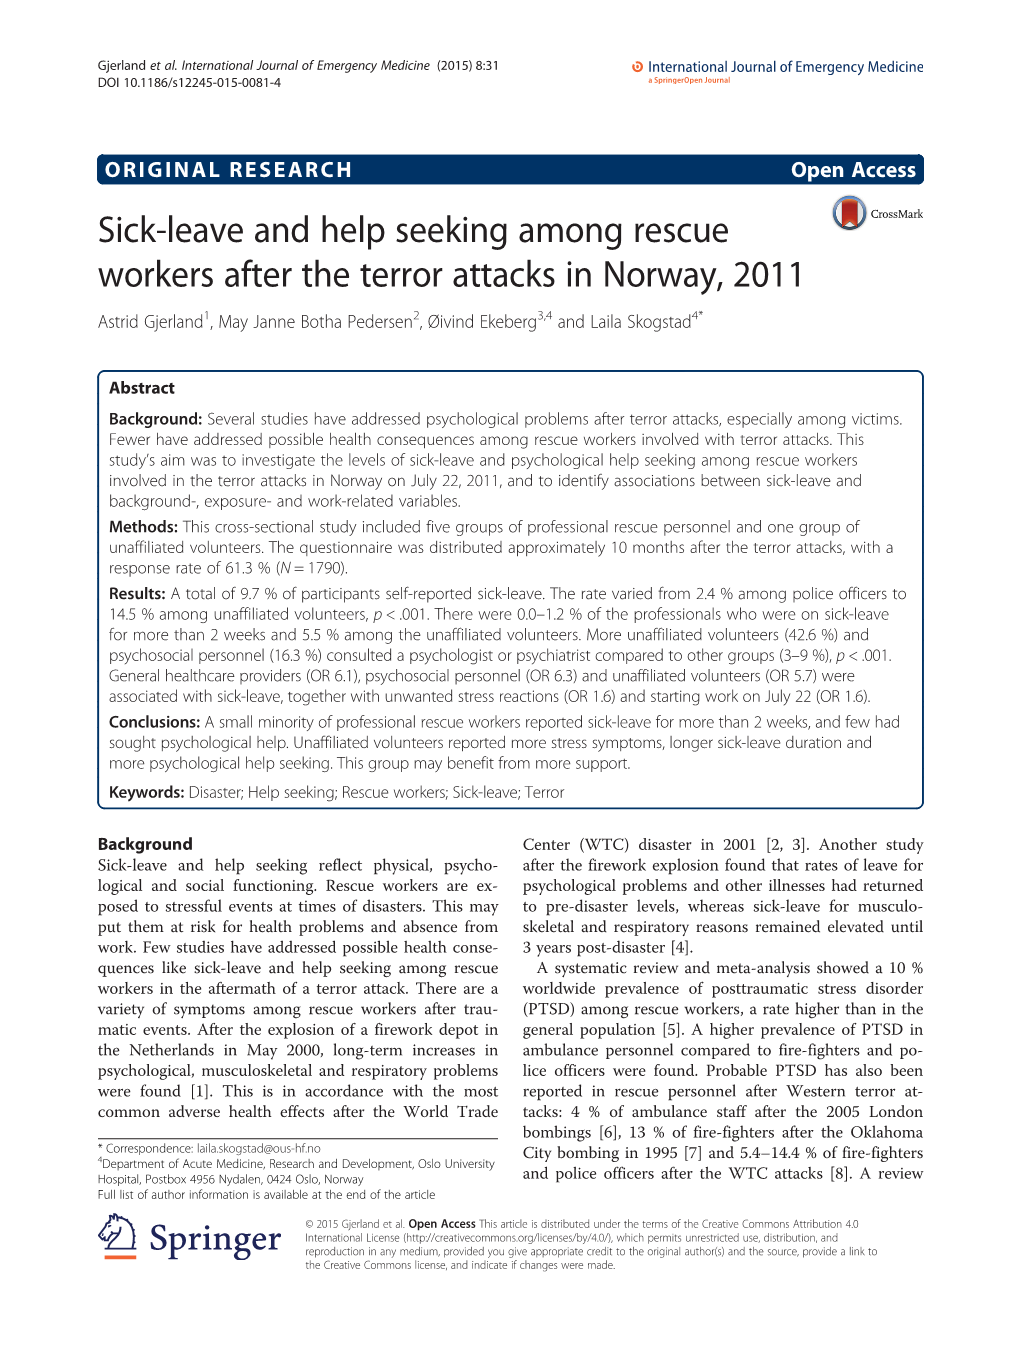 Sick-Leave and Help Seeking Among Rescue Workers After the Terror Attacks in Norway, 2011